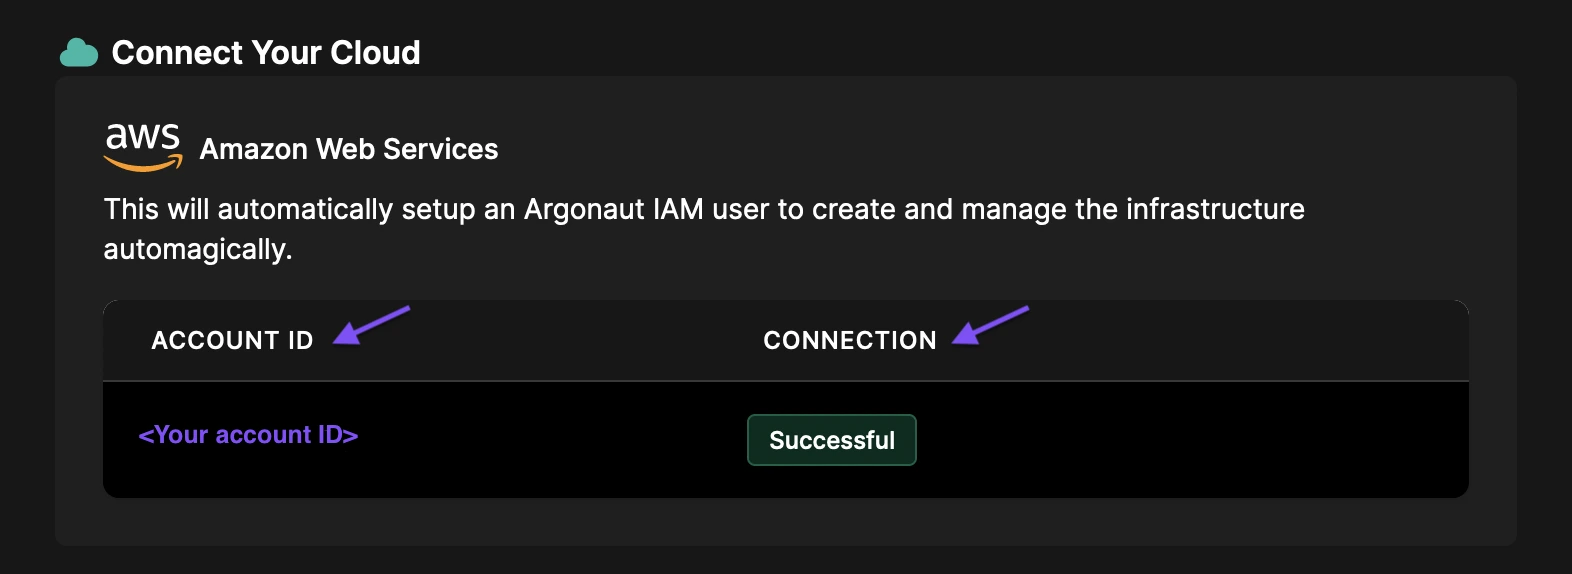 Connect to your AWS account